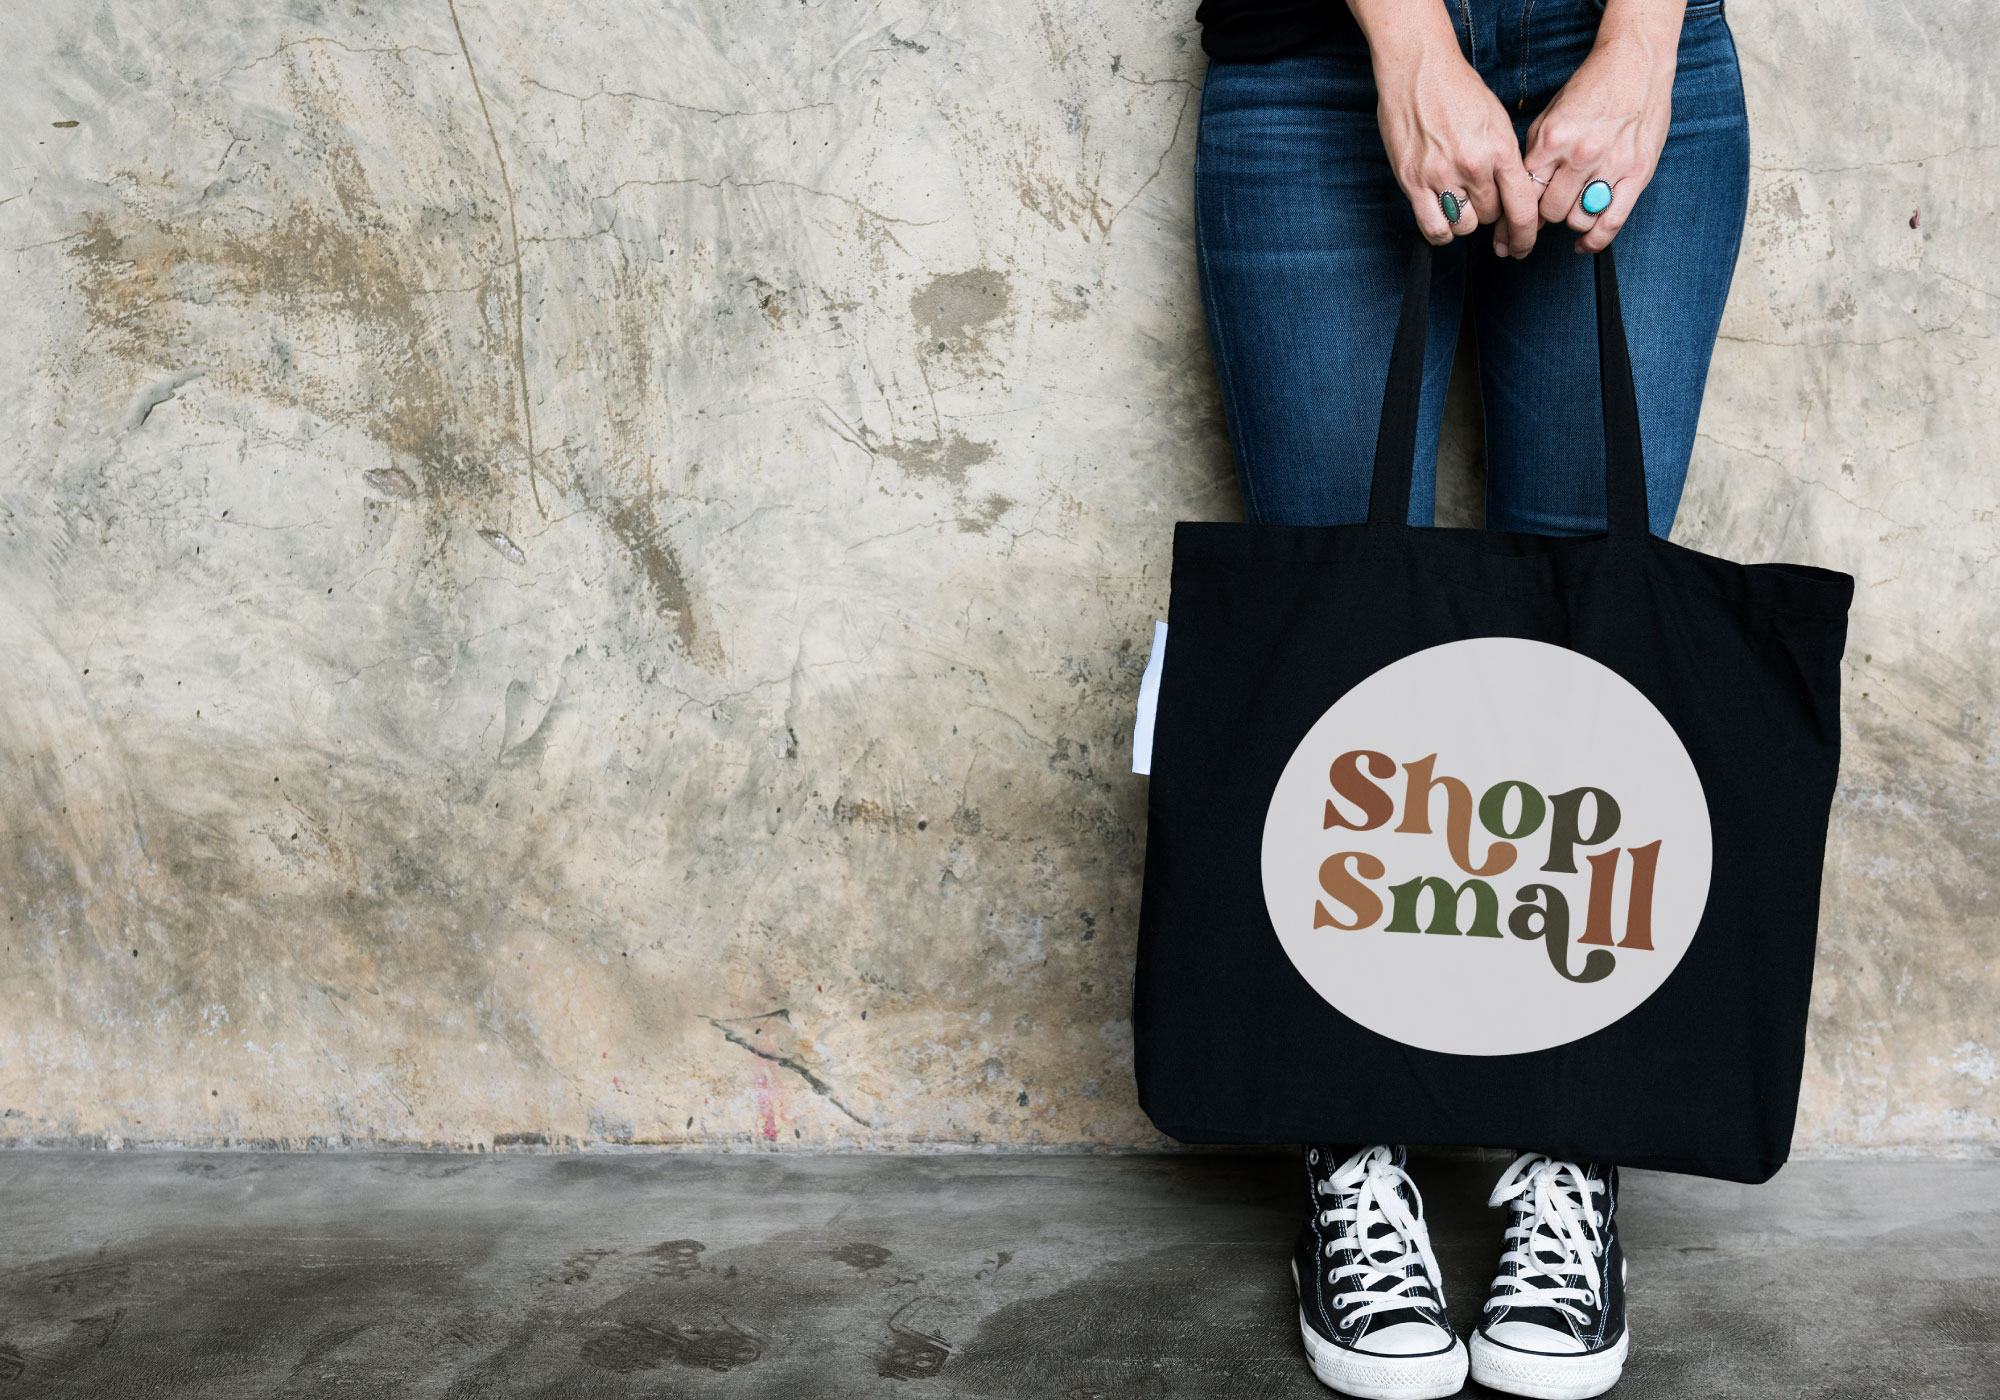 Free Shop Small PNG